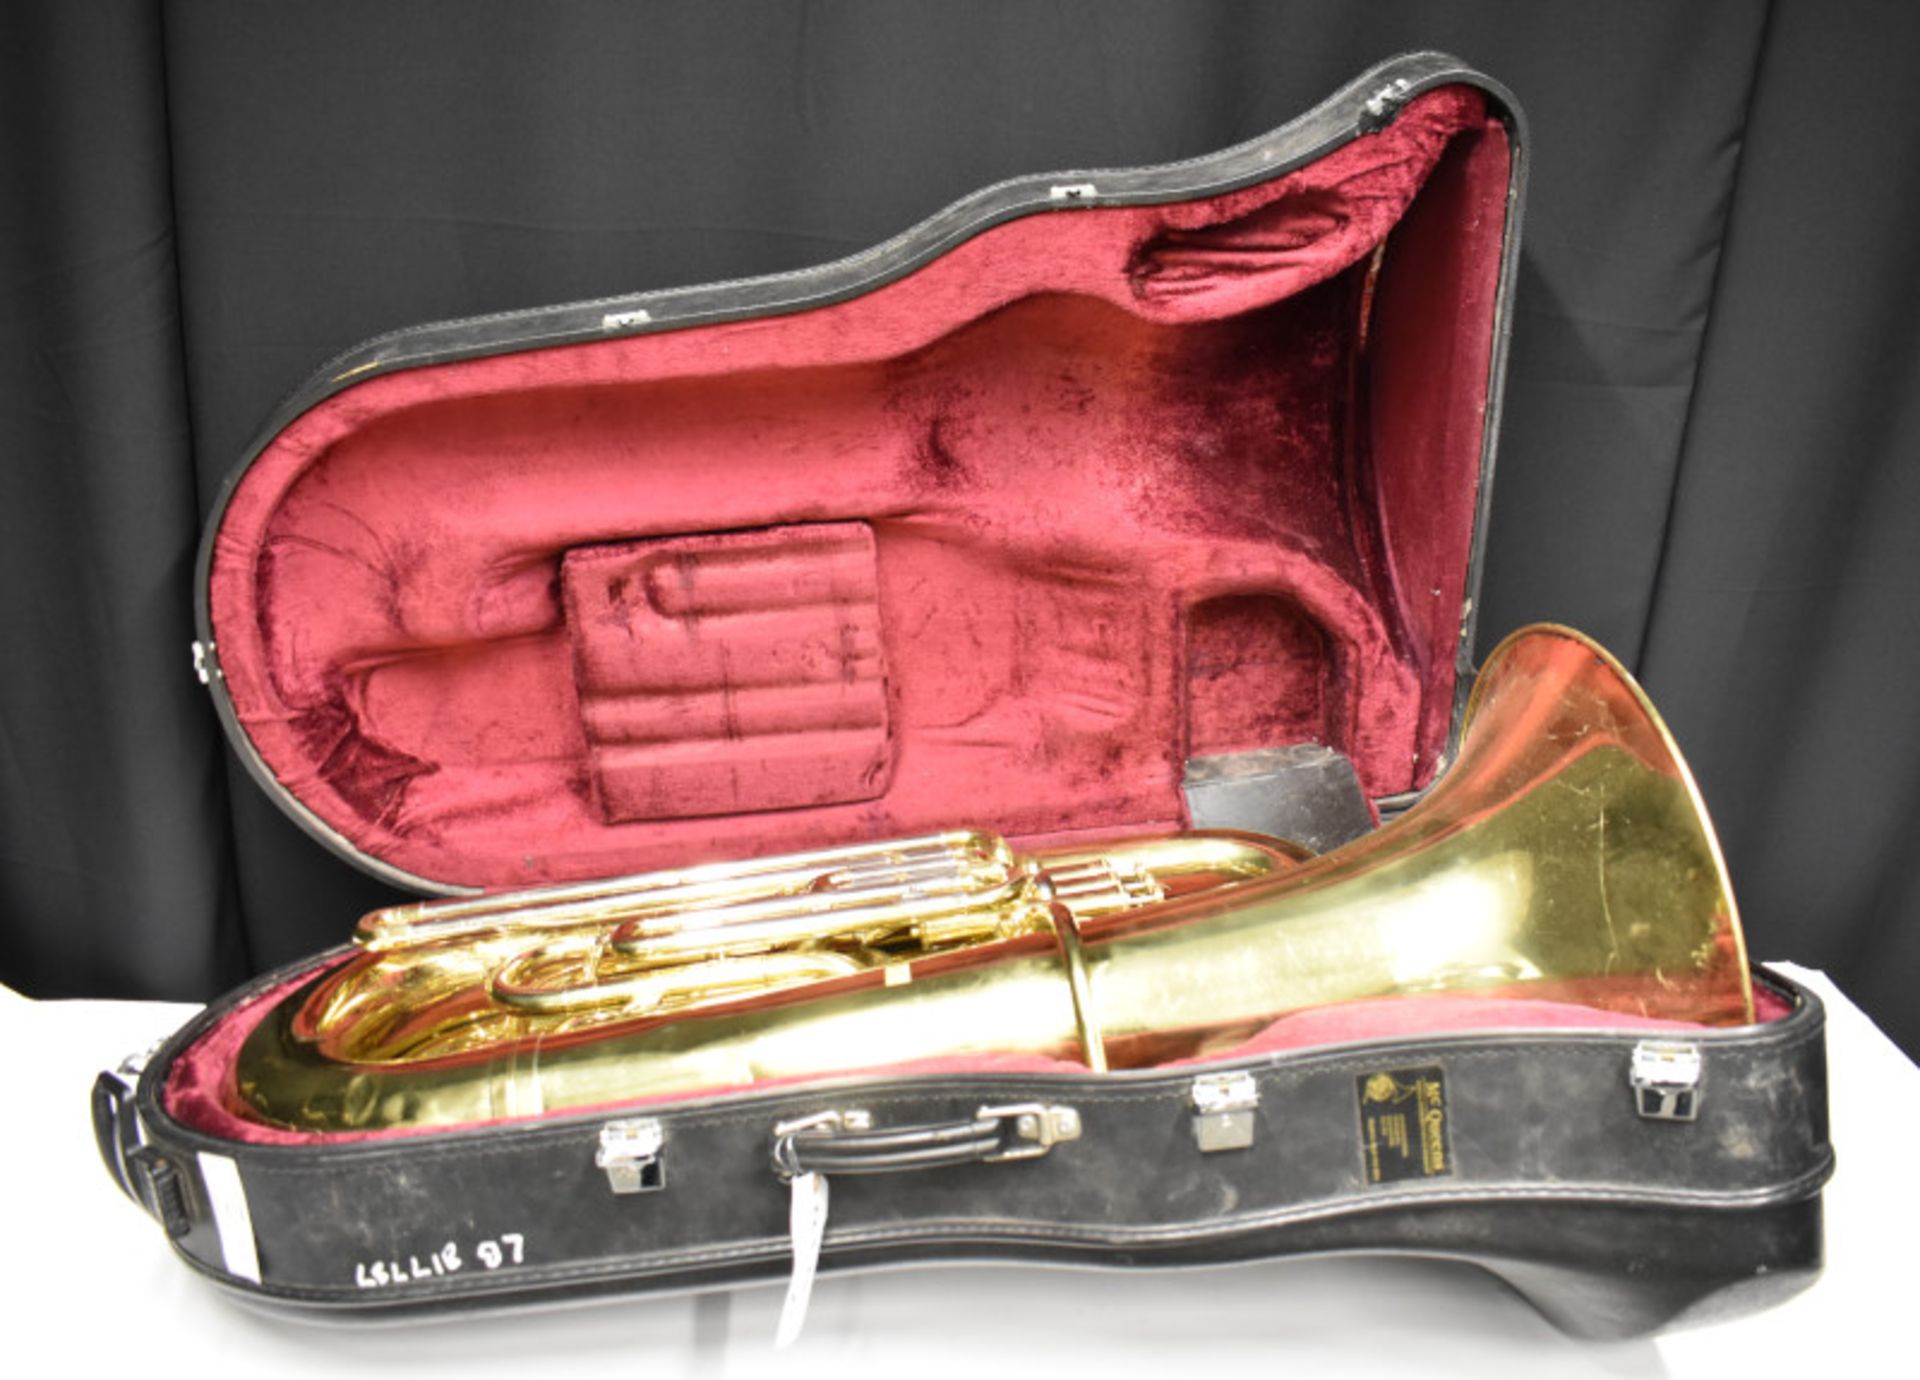 Besson Sovereign 994 Tuba in Besson case (missing wheel) - Serial No. 817787 - Please ch